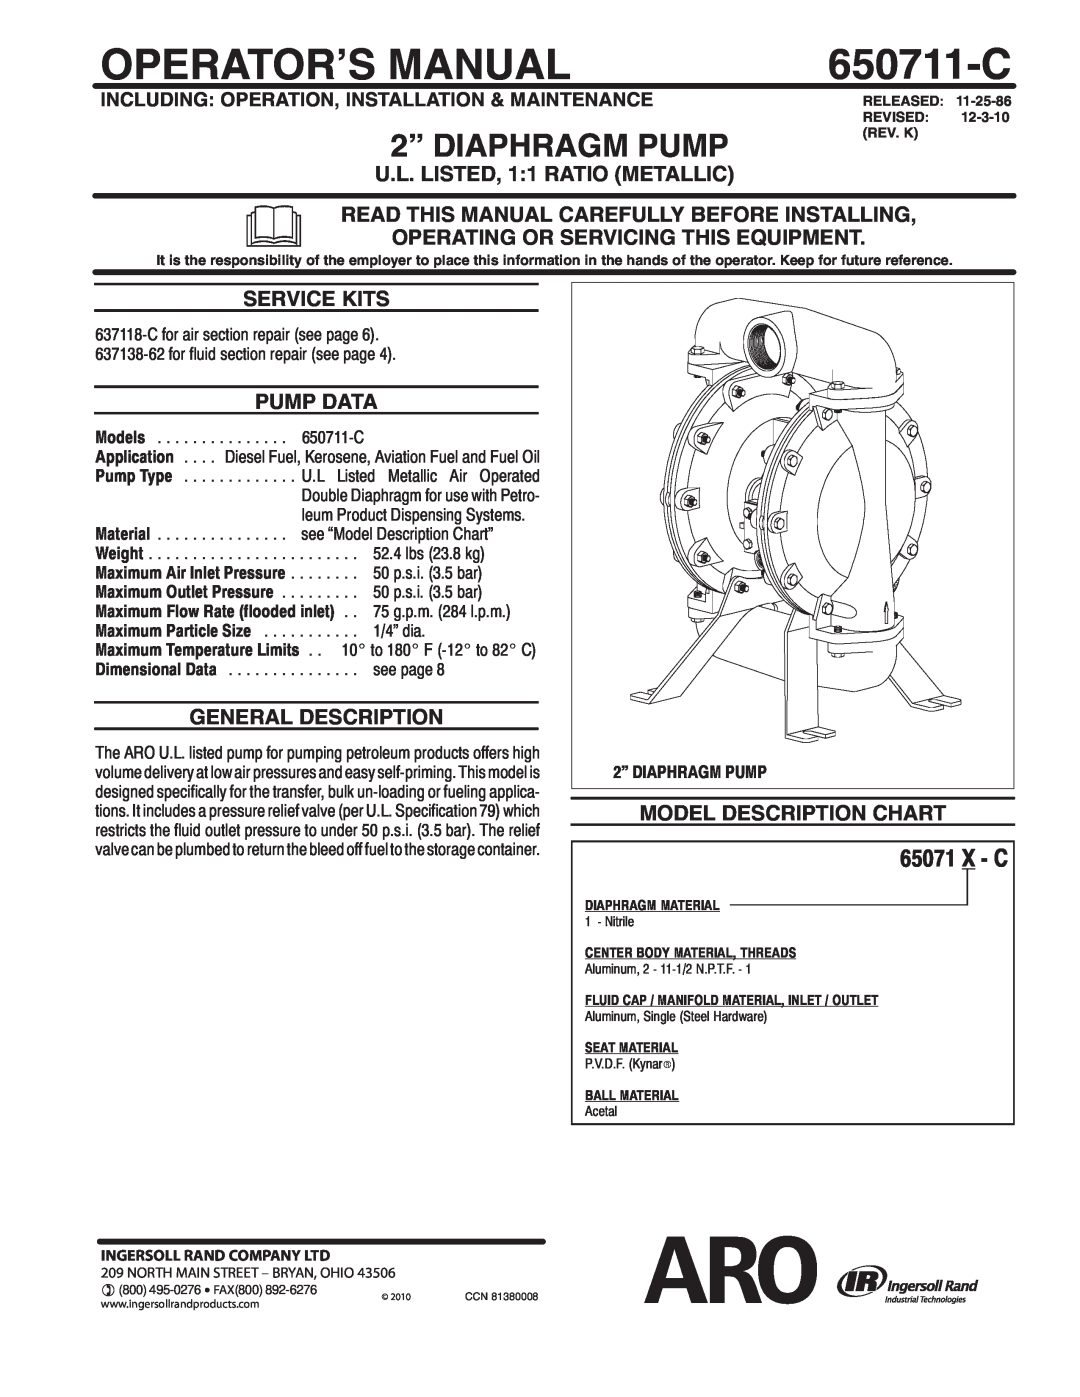 Ingersoll-Rand 650711-C manual U.L. LISTED, 1 1 RATIO METALLIC, Read This Manual Carefully Before Installing, 2010 